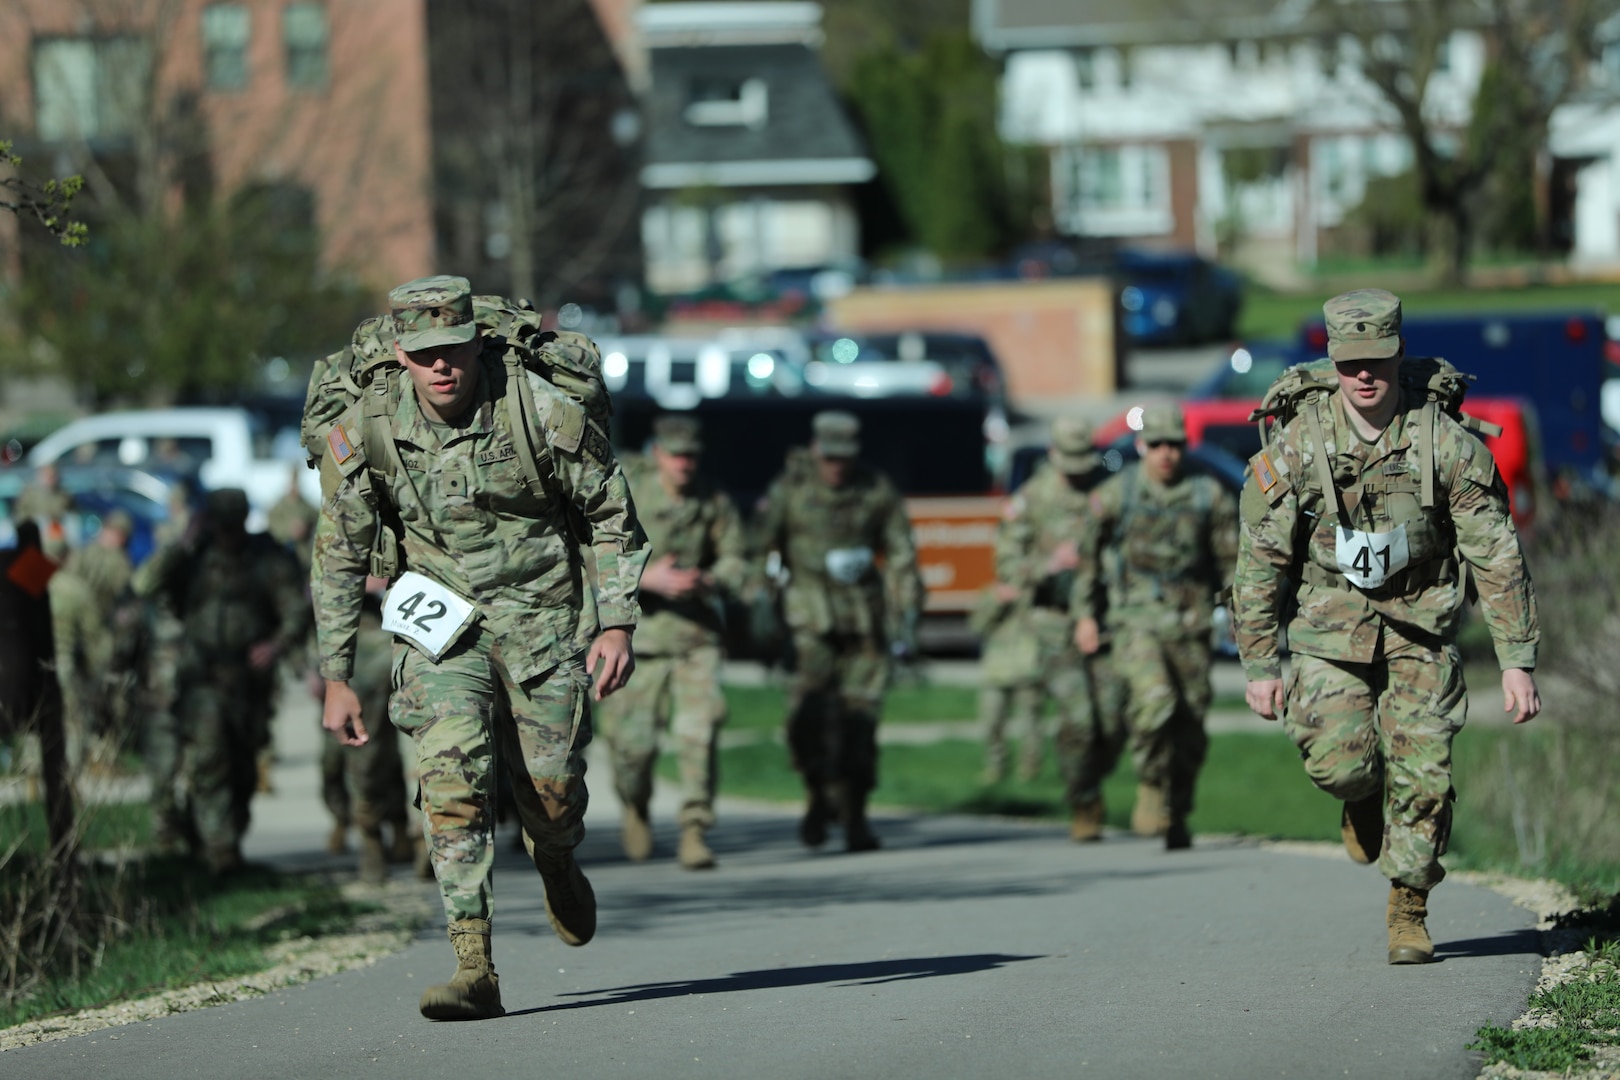 Wisconsin National Guard service members participating in the Norwegian foot march take off from the starting point at the Glacial Drumlin State Trail on April 19, 2024. The Norwegian foot march challenges participants to complete 30 kilometers (18.6 miles) while carrying at least 24 pounds in a rucksack on their back. (U.S. National Guard photo by Staff Sgt. Amber Peck)